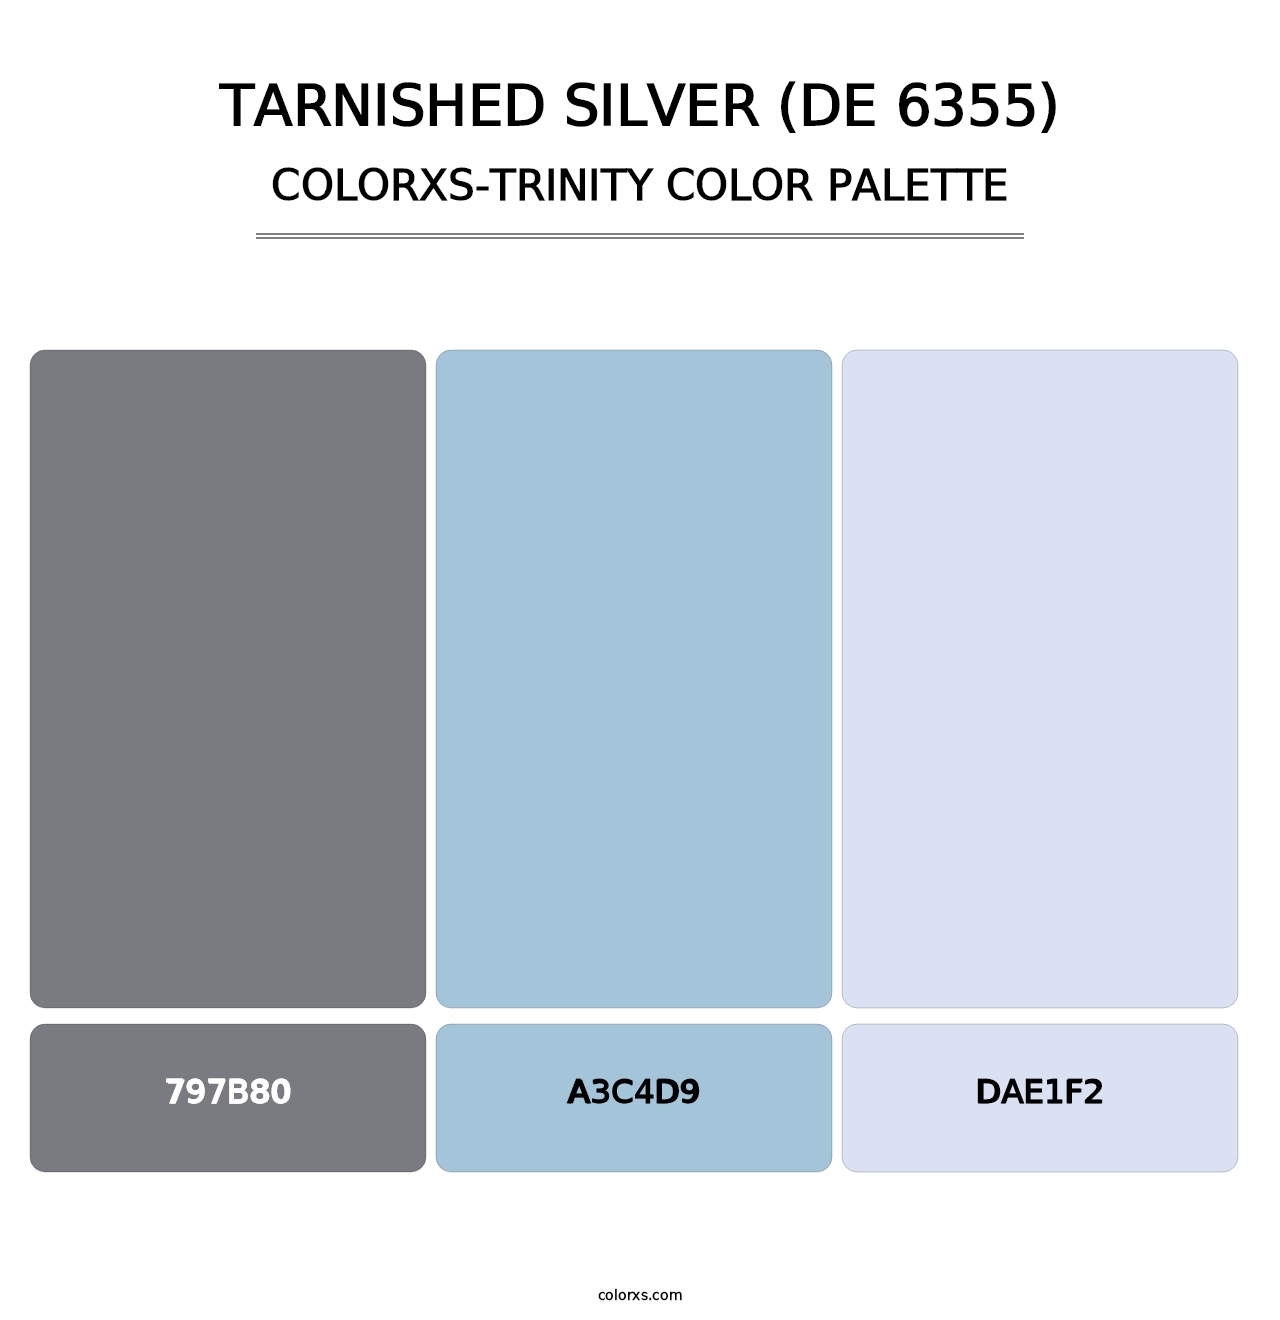 Tarnished Silver (DE 6355) - Colorxs Trinity Palette